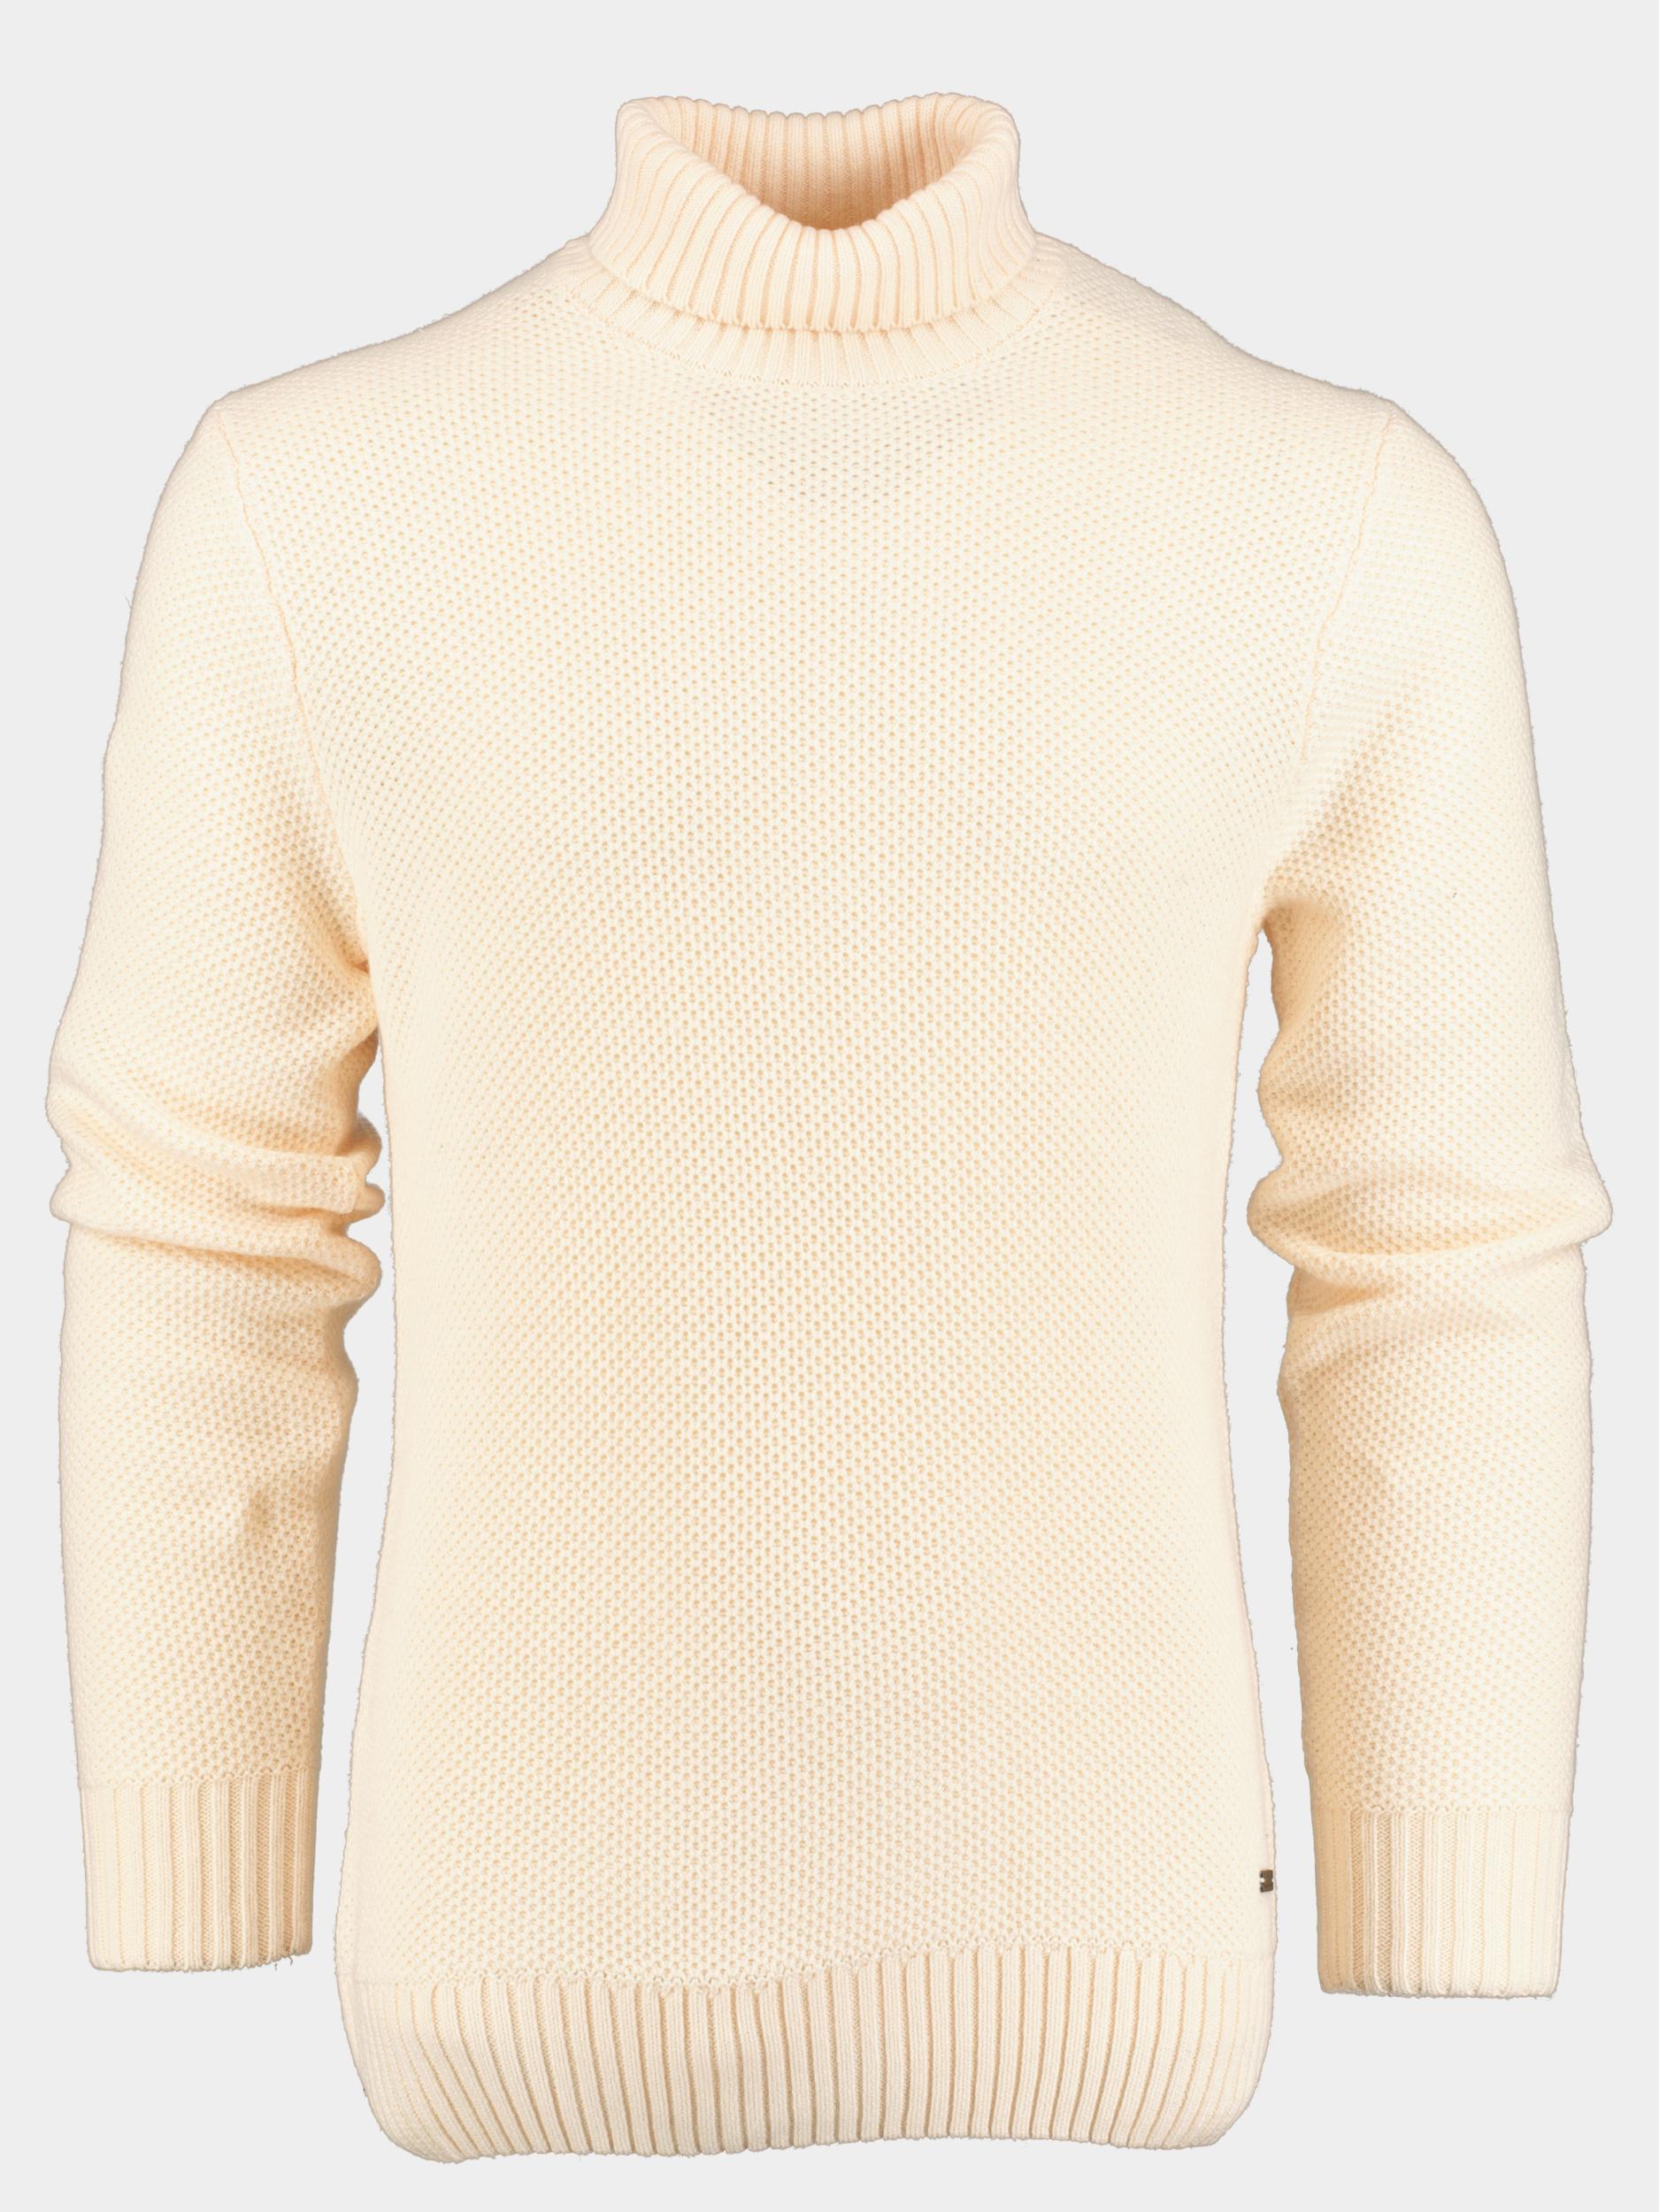 Born With Appetite Coltrui Wit Finnley Roll Neck Structure 23305FI16/150 off white